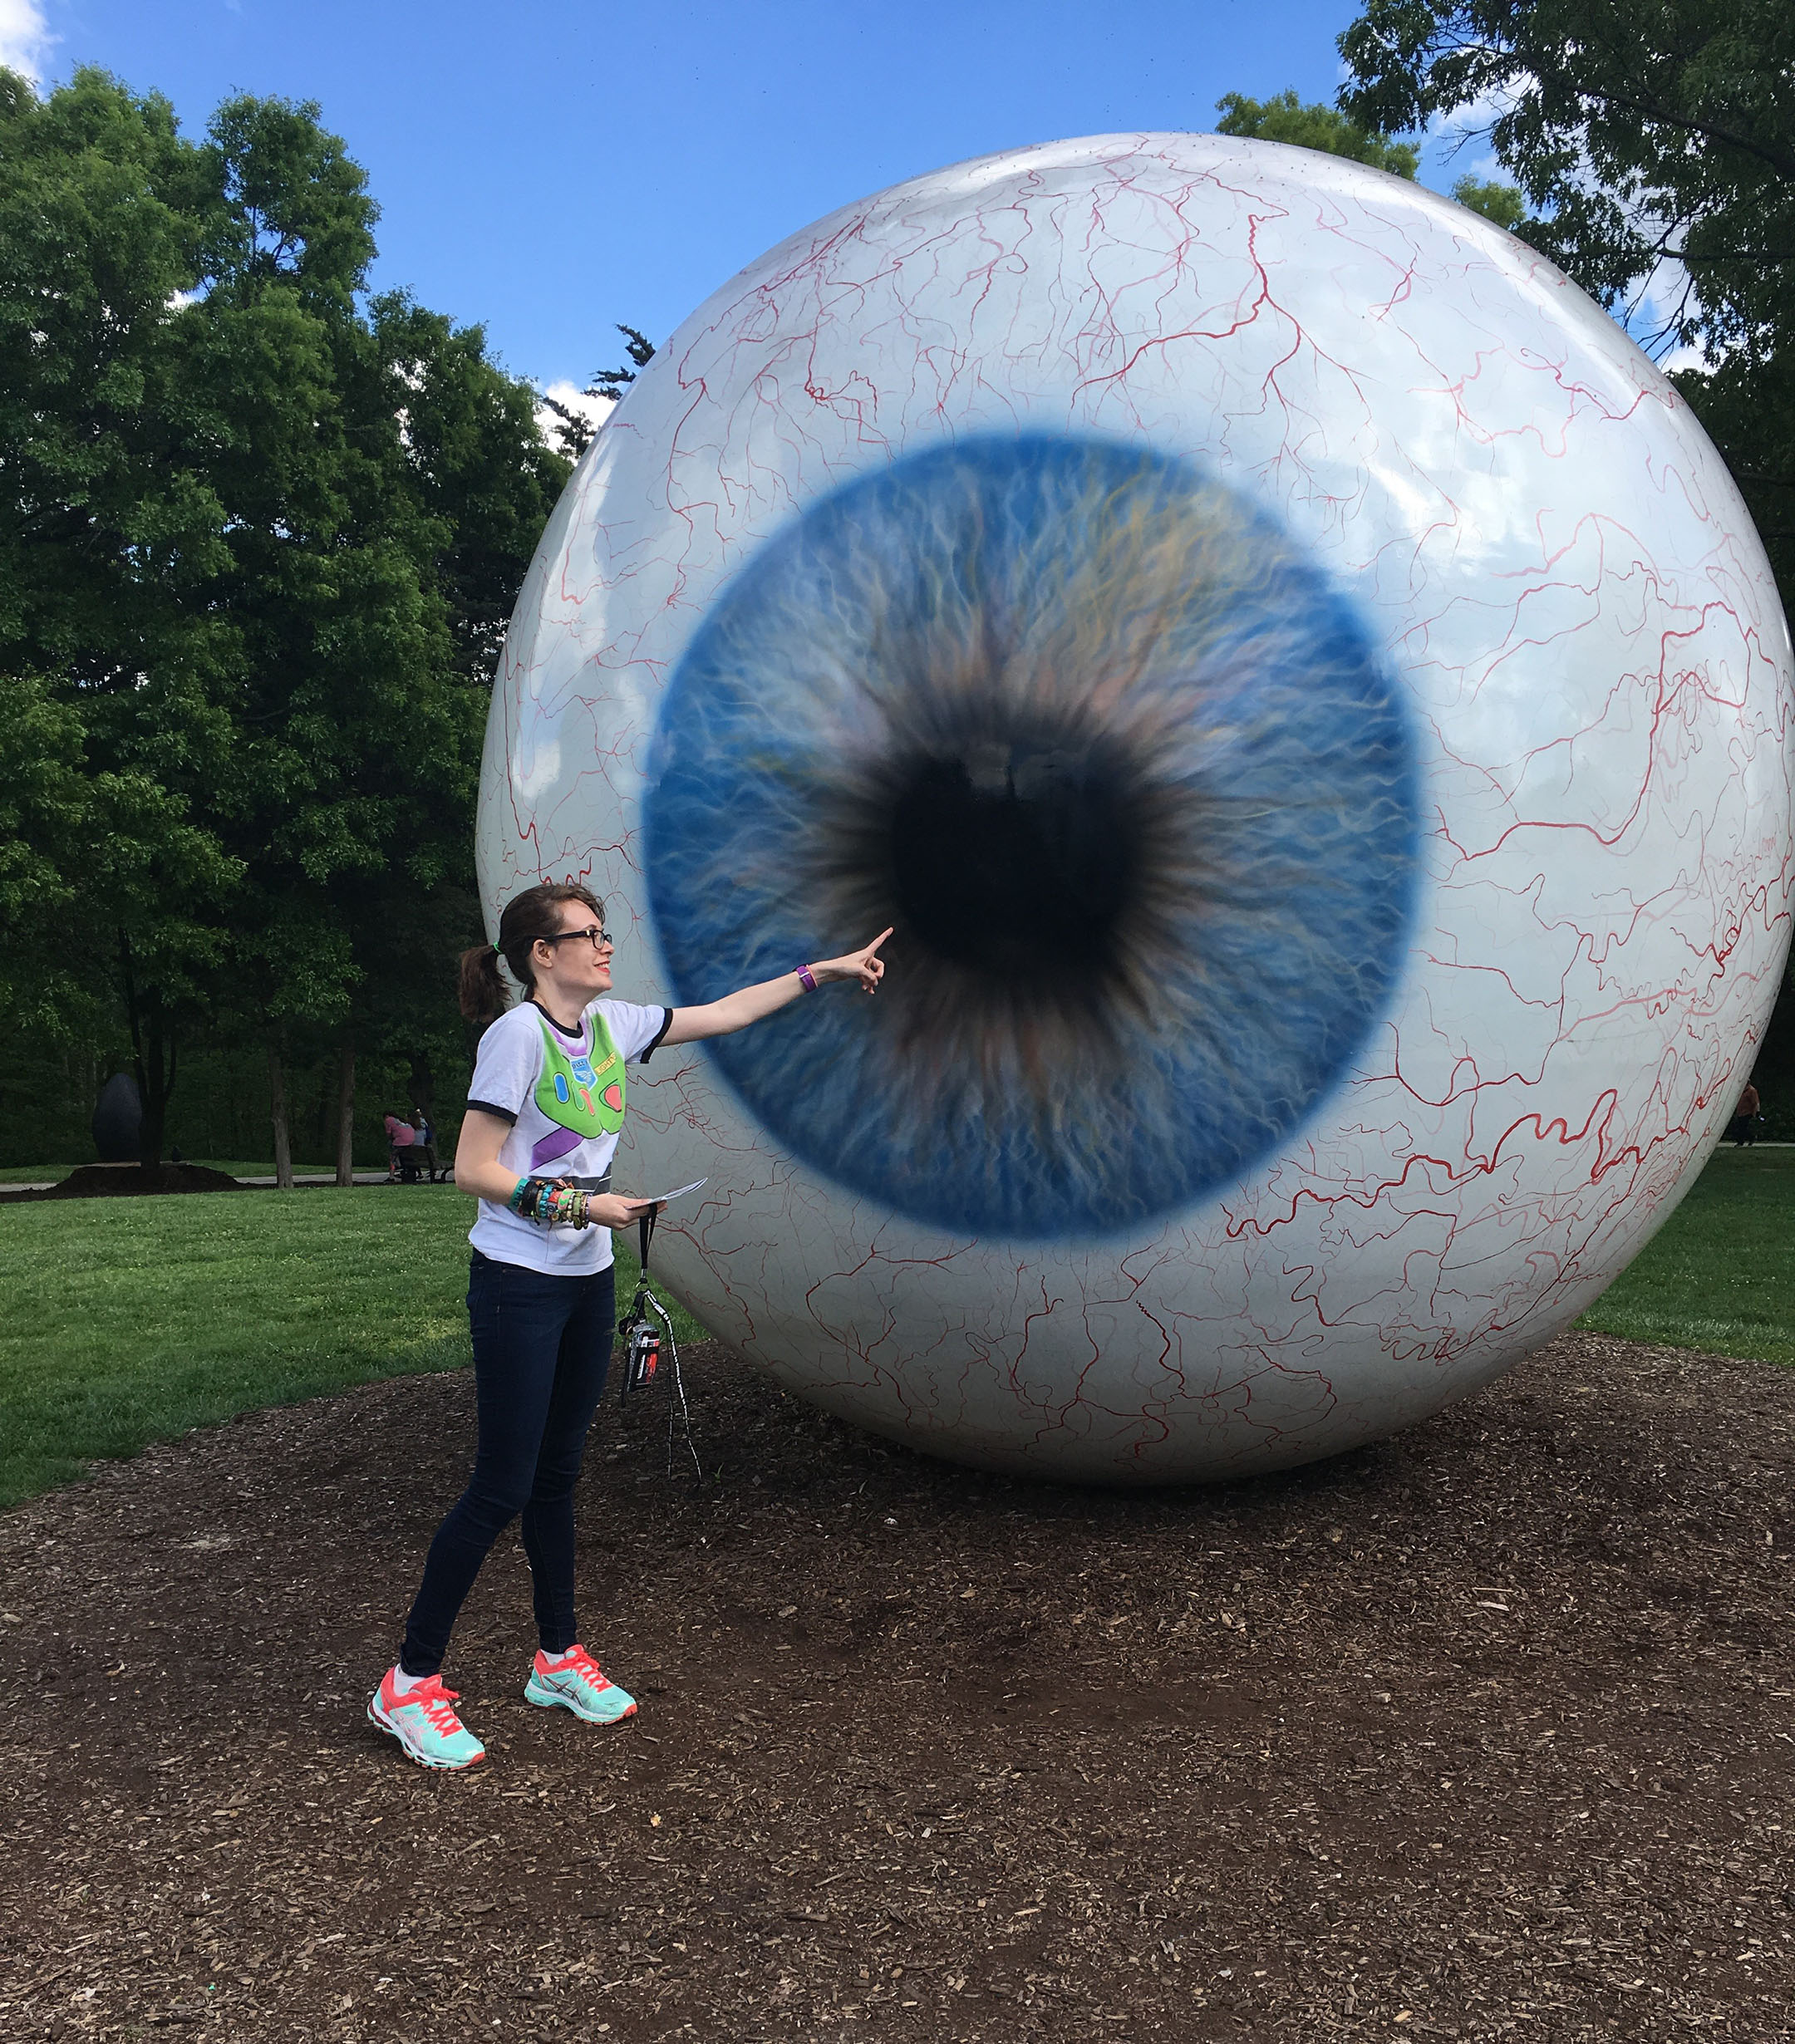 Rebecca Jacobs appears to touch the sculpture, Eye